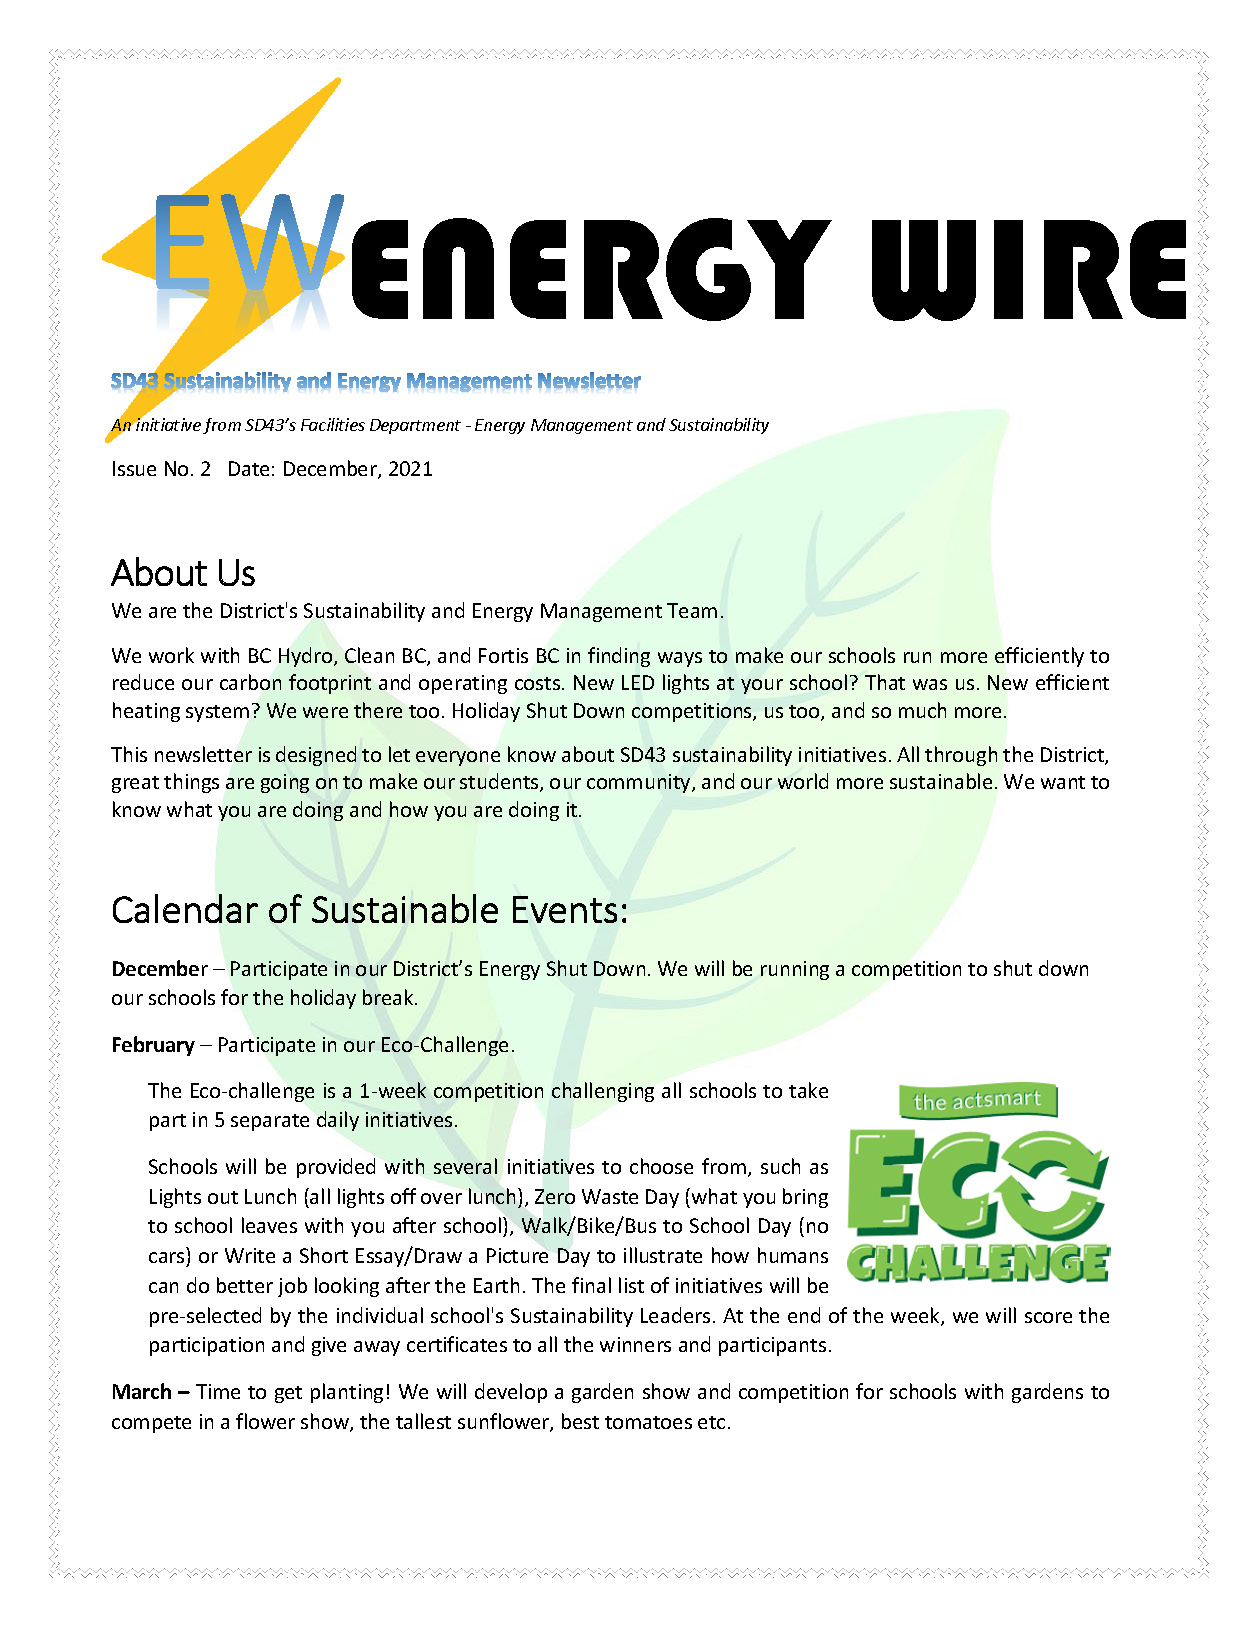 Energy Wire Newsletter December 2021 final_Page_1.jpg